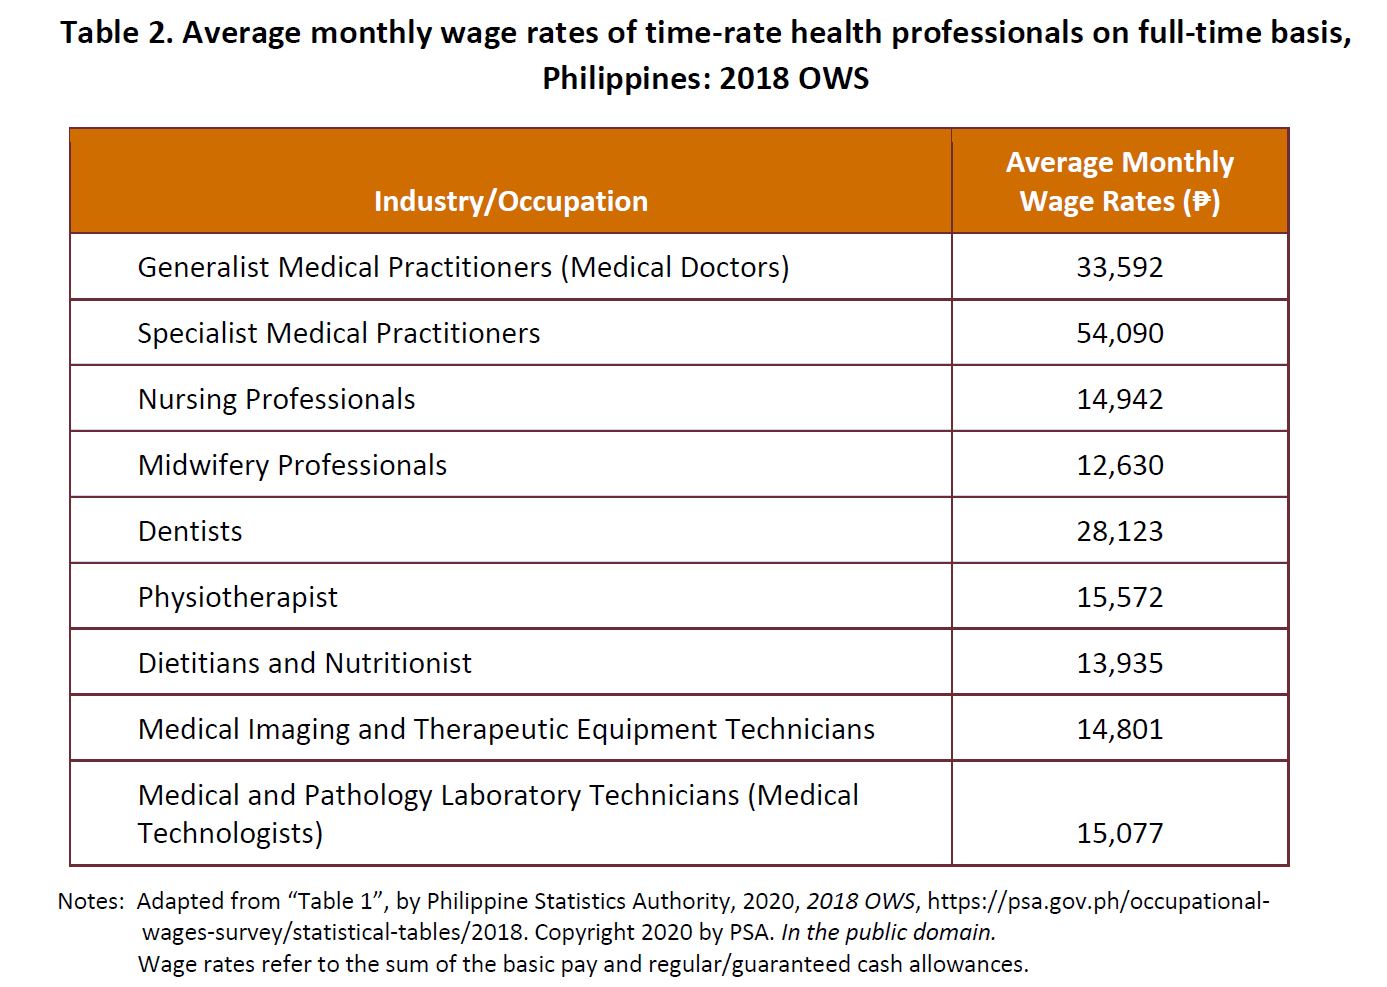 Table 2. Average monthly wage rates of time-rate health professionals on full-time basis, Philippines: 2018 OWS